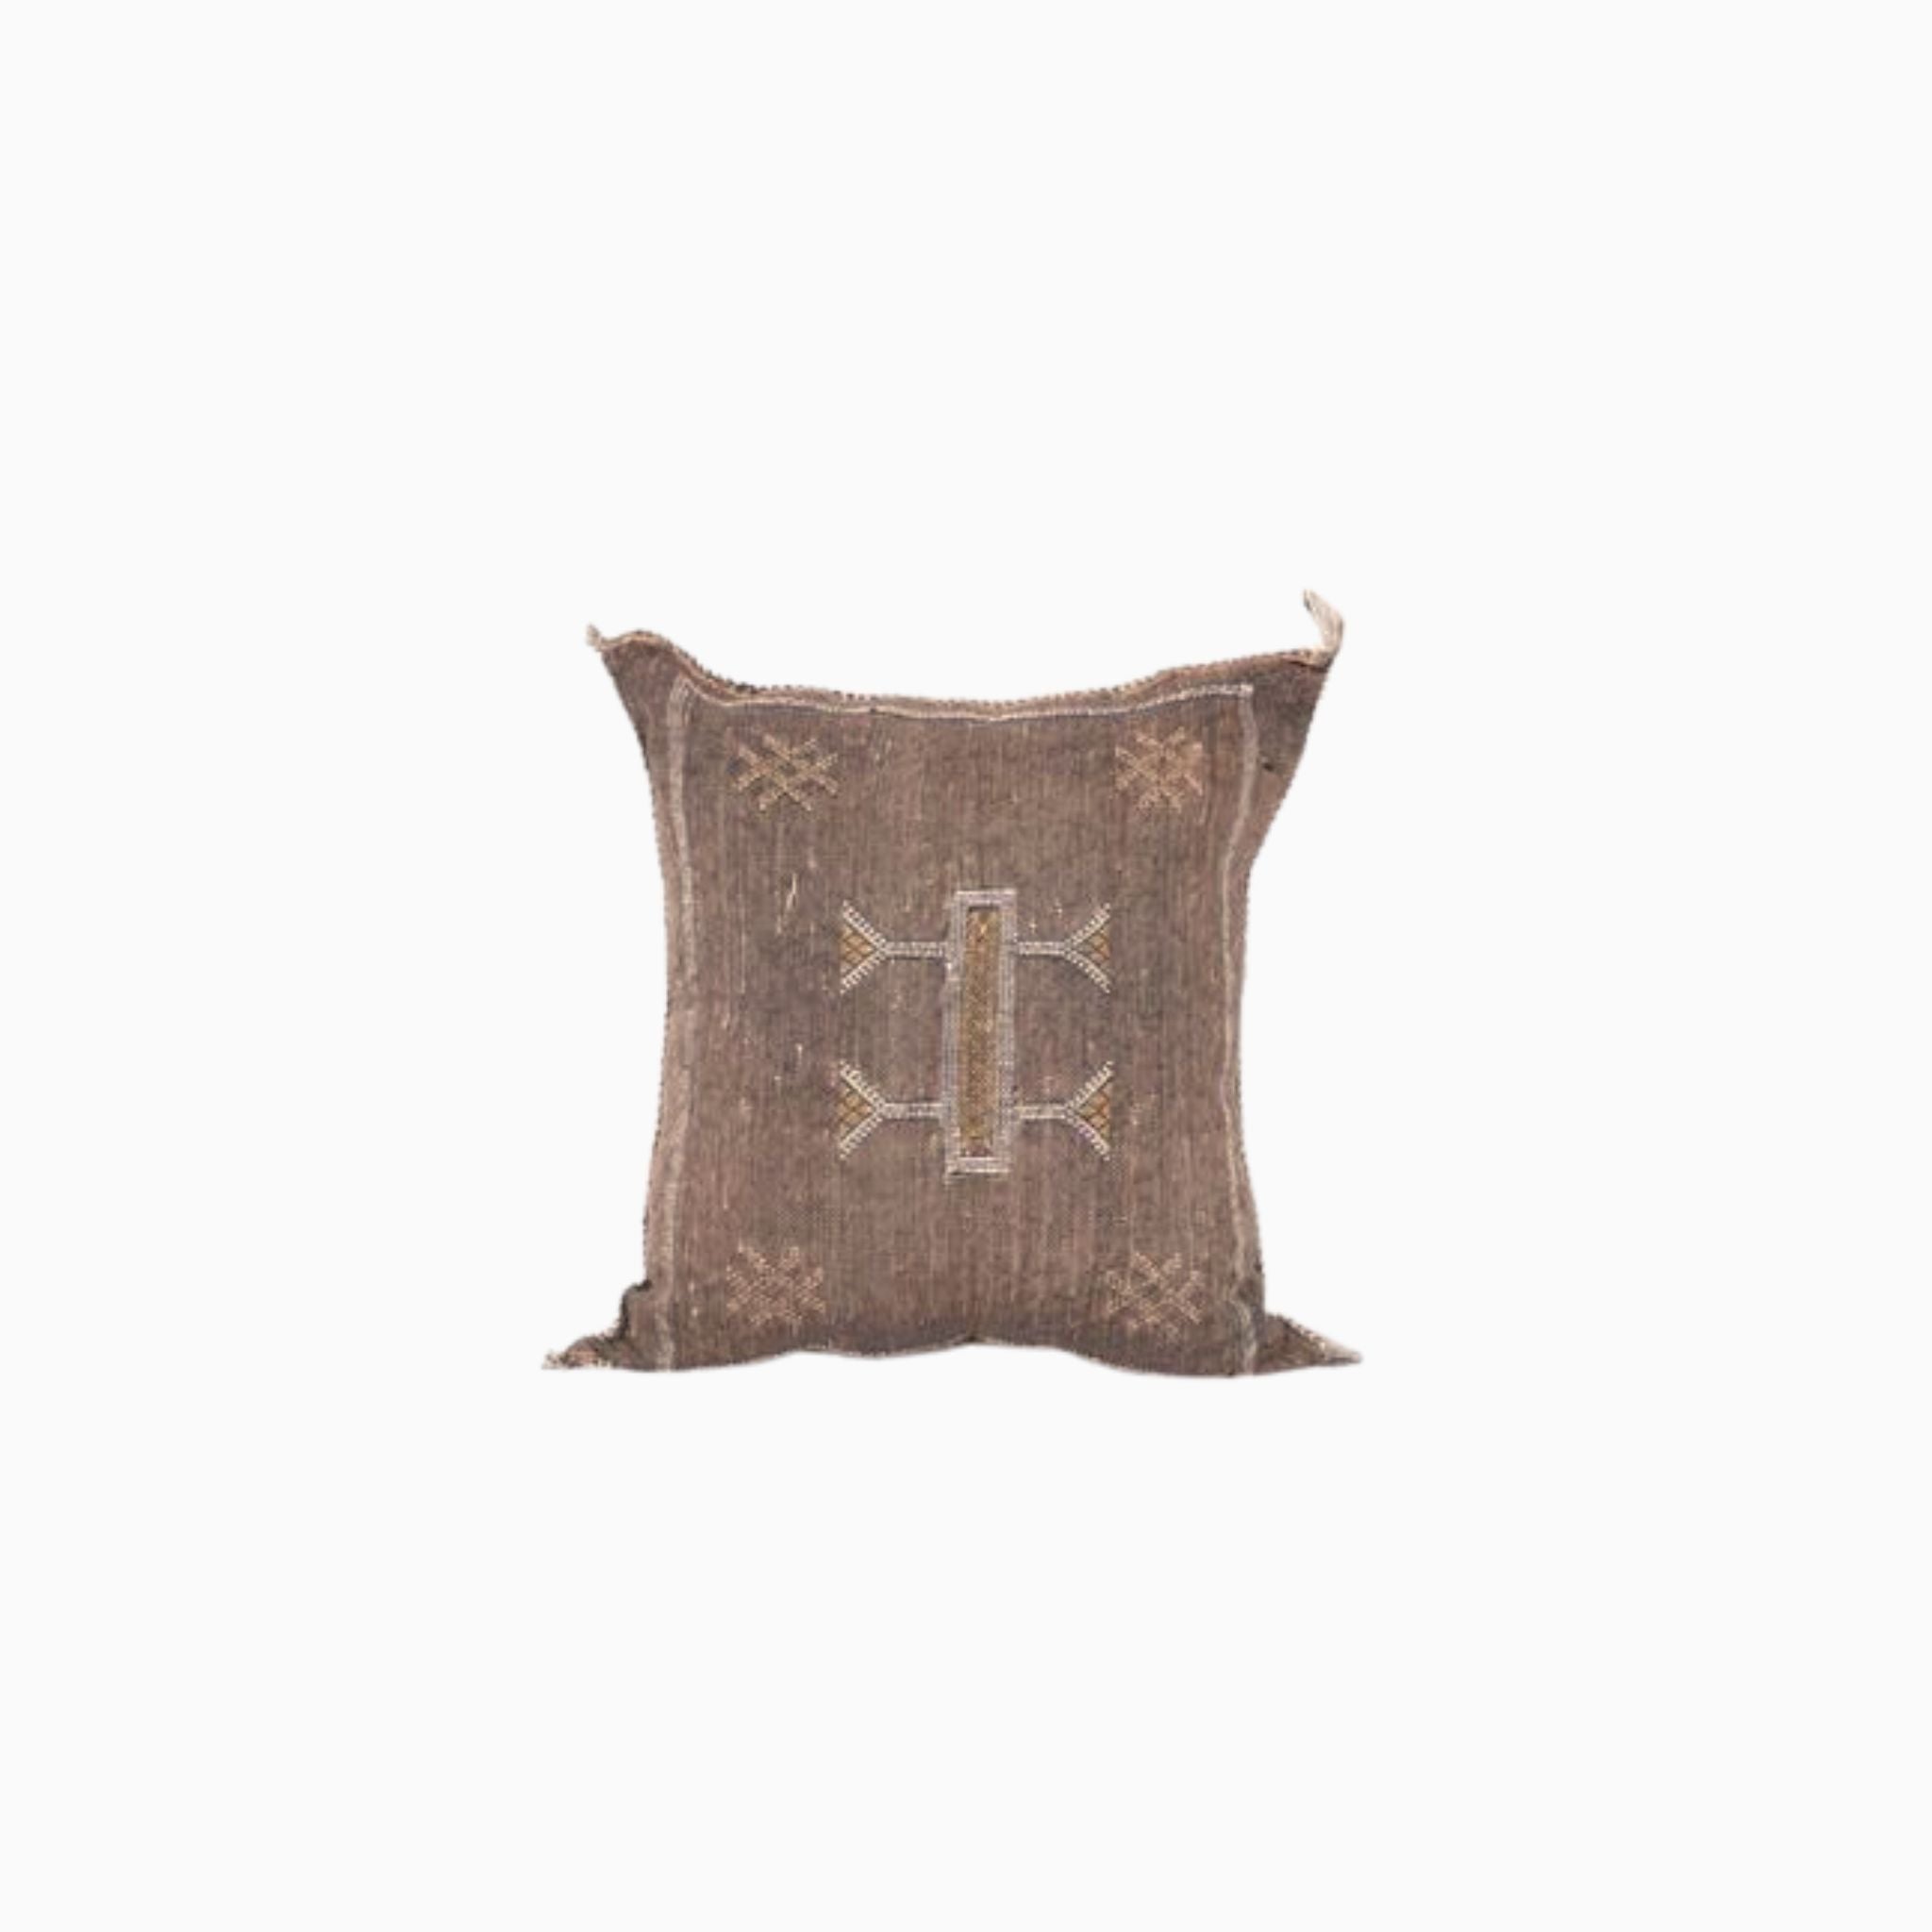 RACHEL THROW PILLOW - Simply Elevated Home Furnishings 